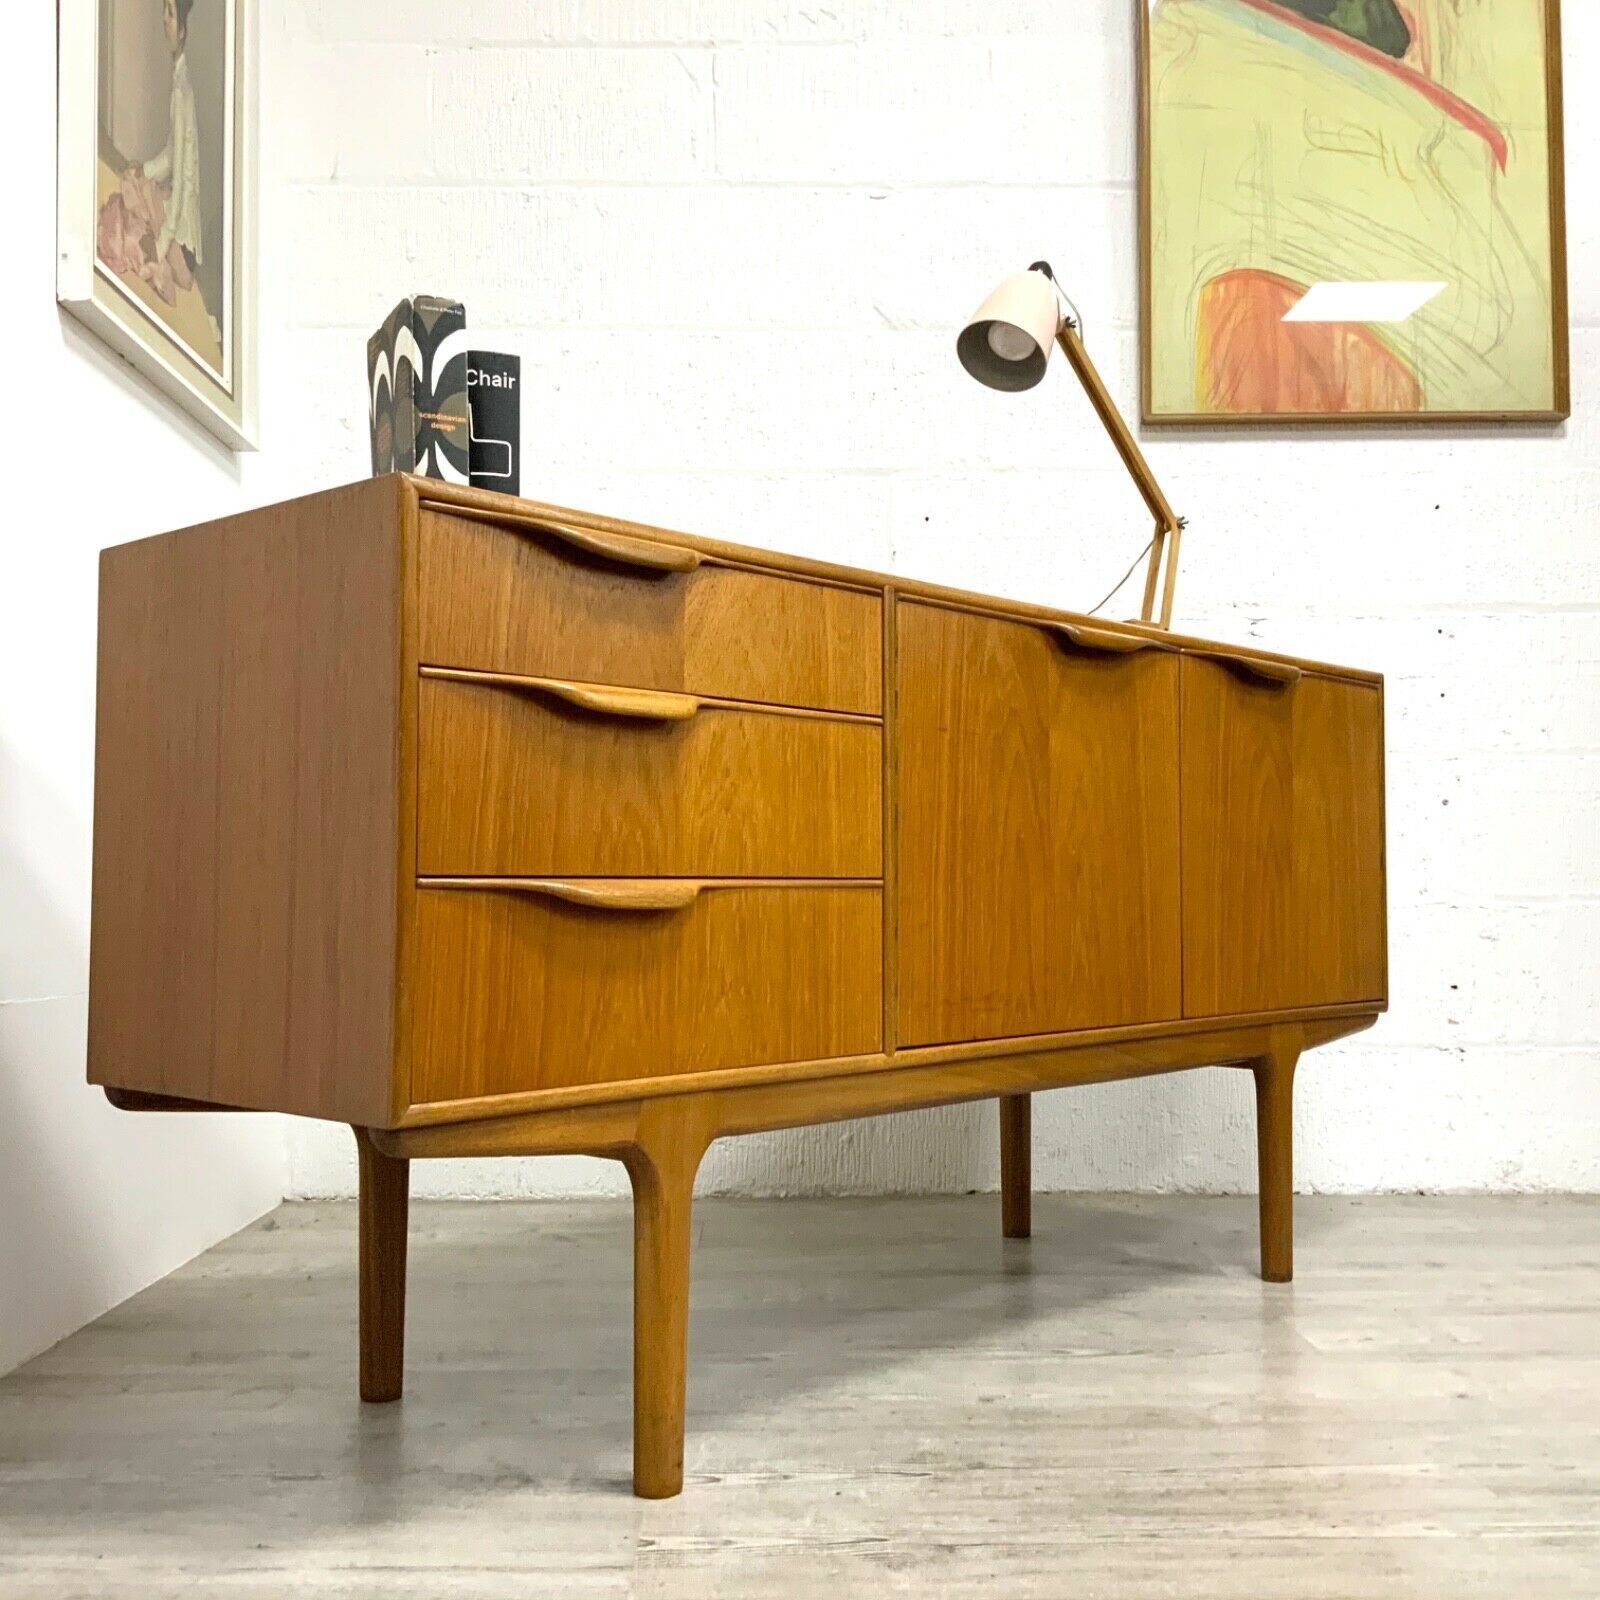 Mid Century Modern Sideboards For Sale | Vinterior With Regard To Most Current Mid Century Modern Sideboards (View 14 of 15)